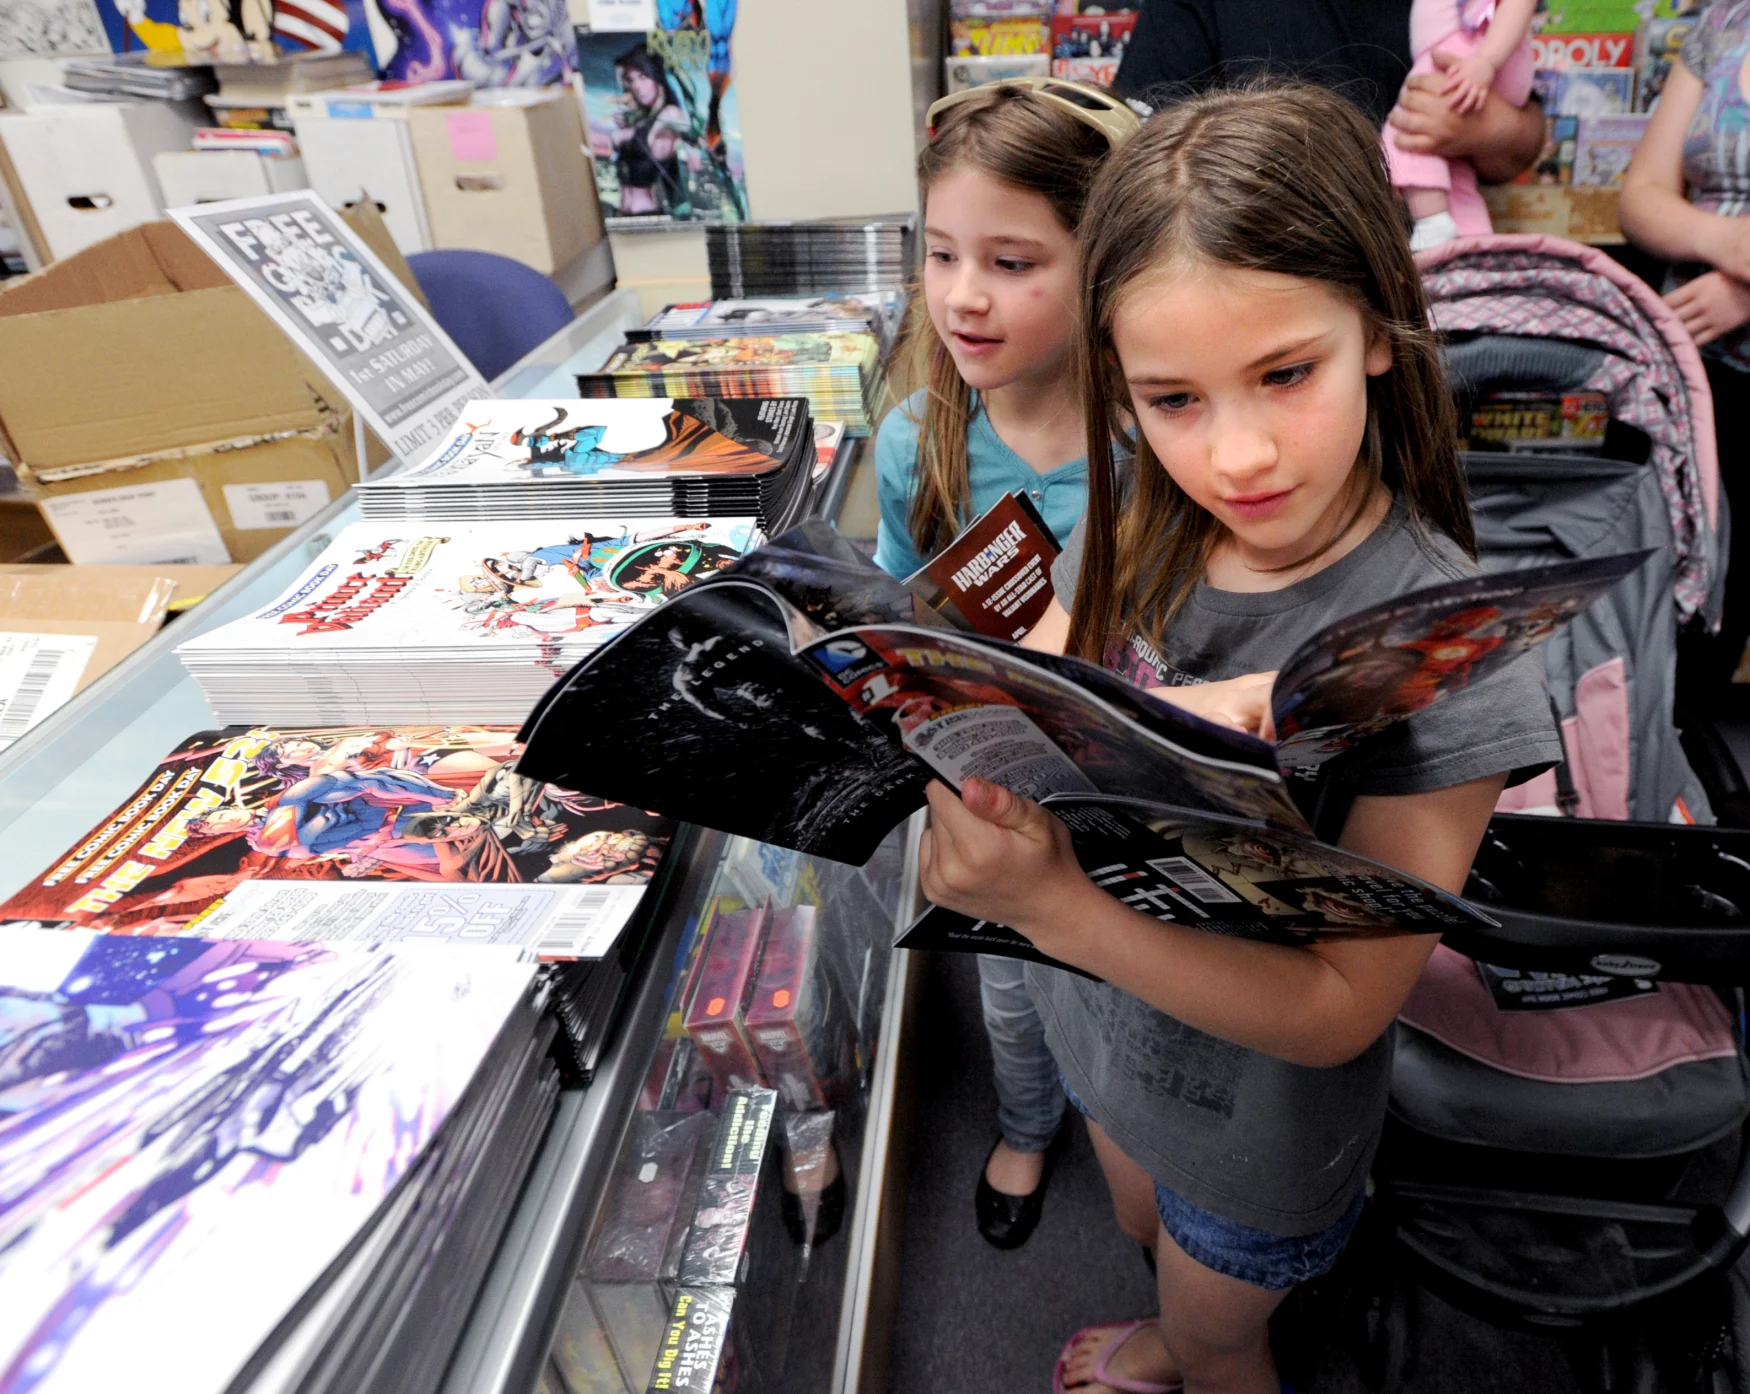 Nikki Beck, 9, right, and her sister, Alana, 8, both of Firestone, look through the free comics in order to make their choice.Time Warp Comics in Boulder is one of thousands of comic book shops around the world celebrating Free Comic Book Day on May 4th. On Free Comic Book Day, over 3.3 million comic books will be given away by participating stores.(Photo by Cliff Grassmick/Digital First Media/Boulder Daily Camera via Getty Images)